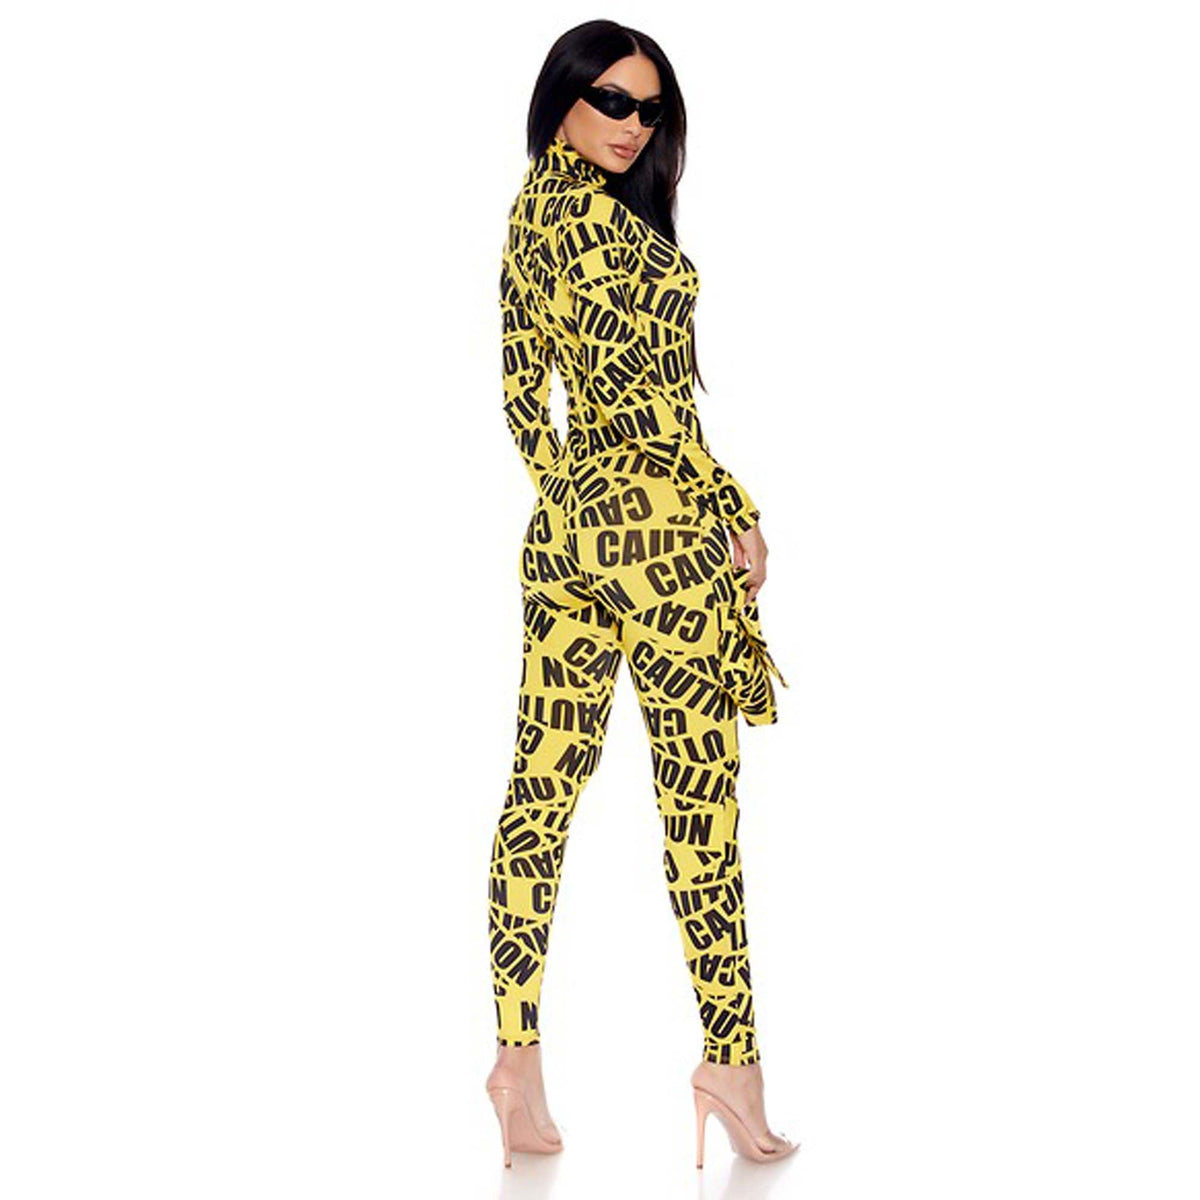 FORPLAY INC. Costumes Caution Tape Costume for Adults, Jumpsuit